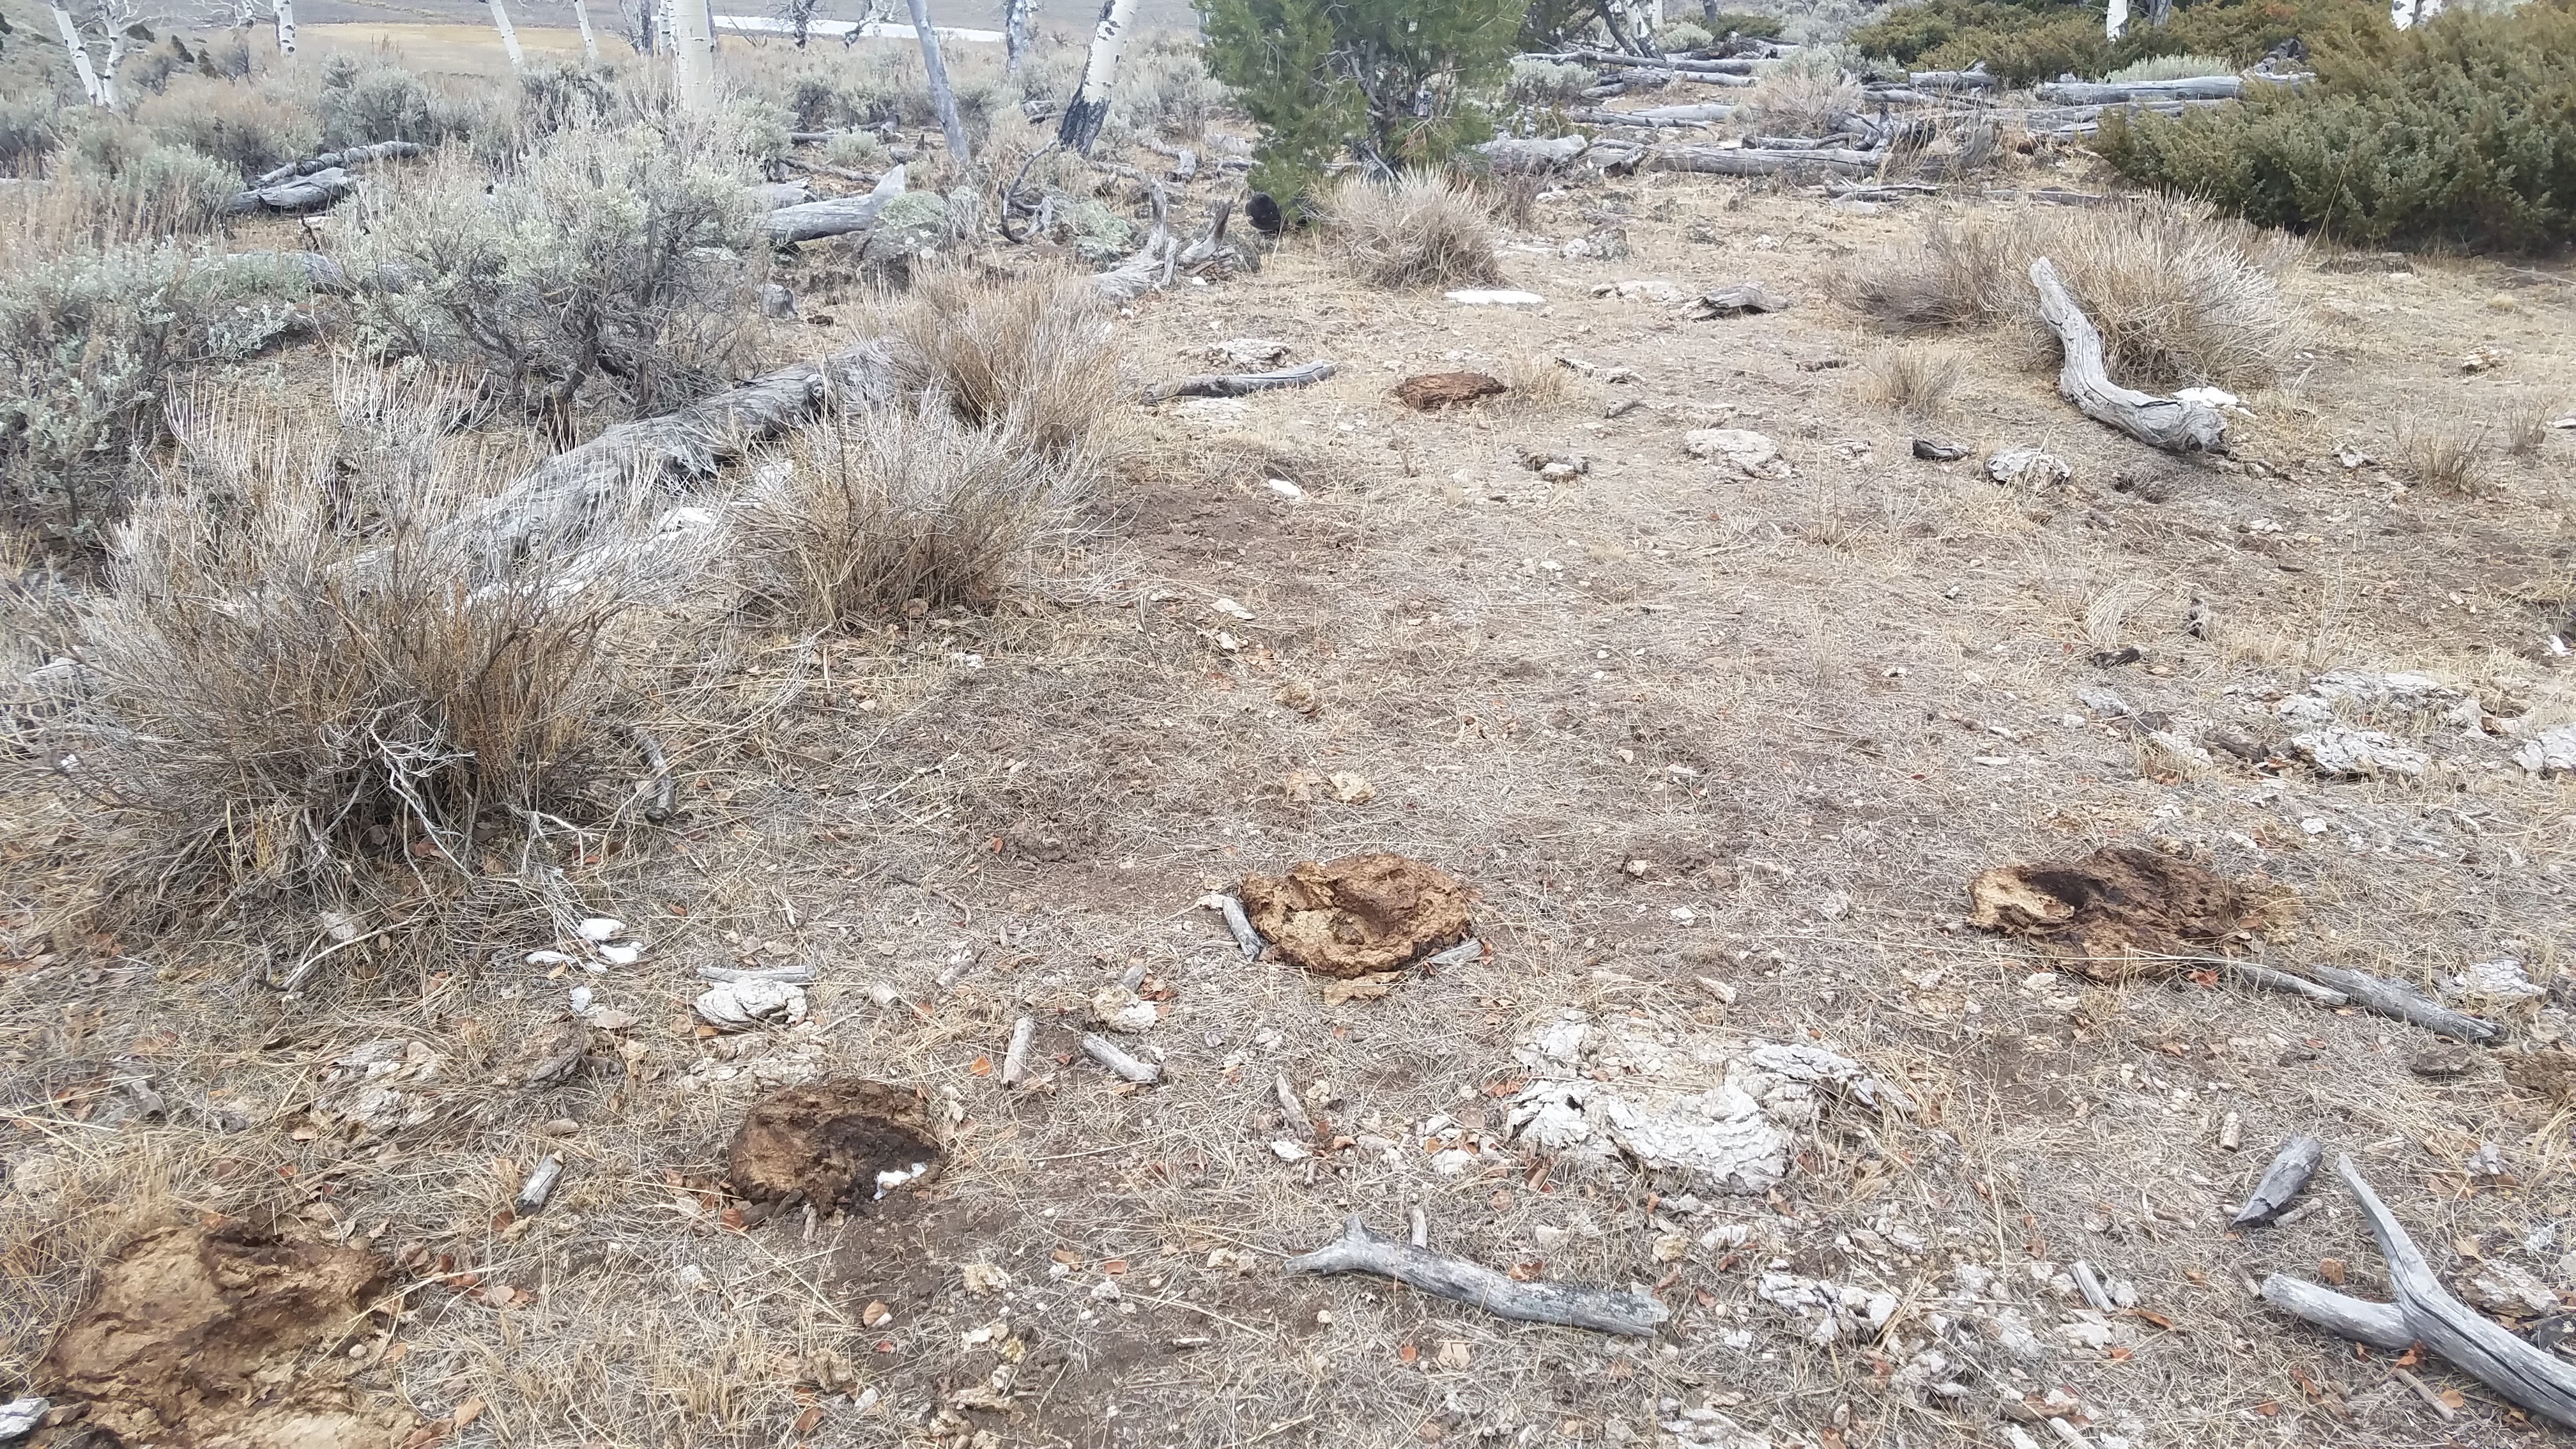 Figure 11. A ground shot from the location of Camera 2 on November 22, 2018. Bovine calling cards, including some from previous years, are evidence of the cows’ passing through. (Please don’t call them cow pies; they are not pies made of cow, but feces from a cow.) Source: Western Watersheds Project.